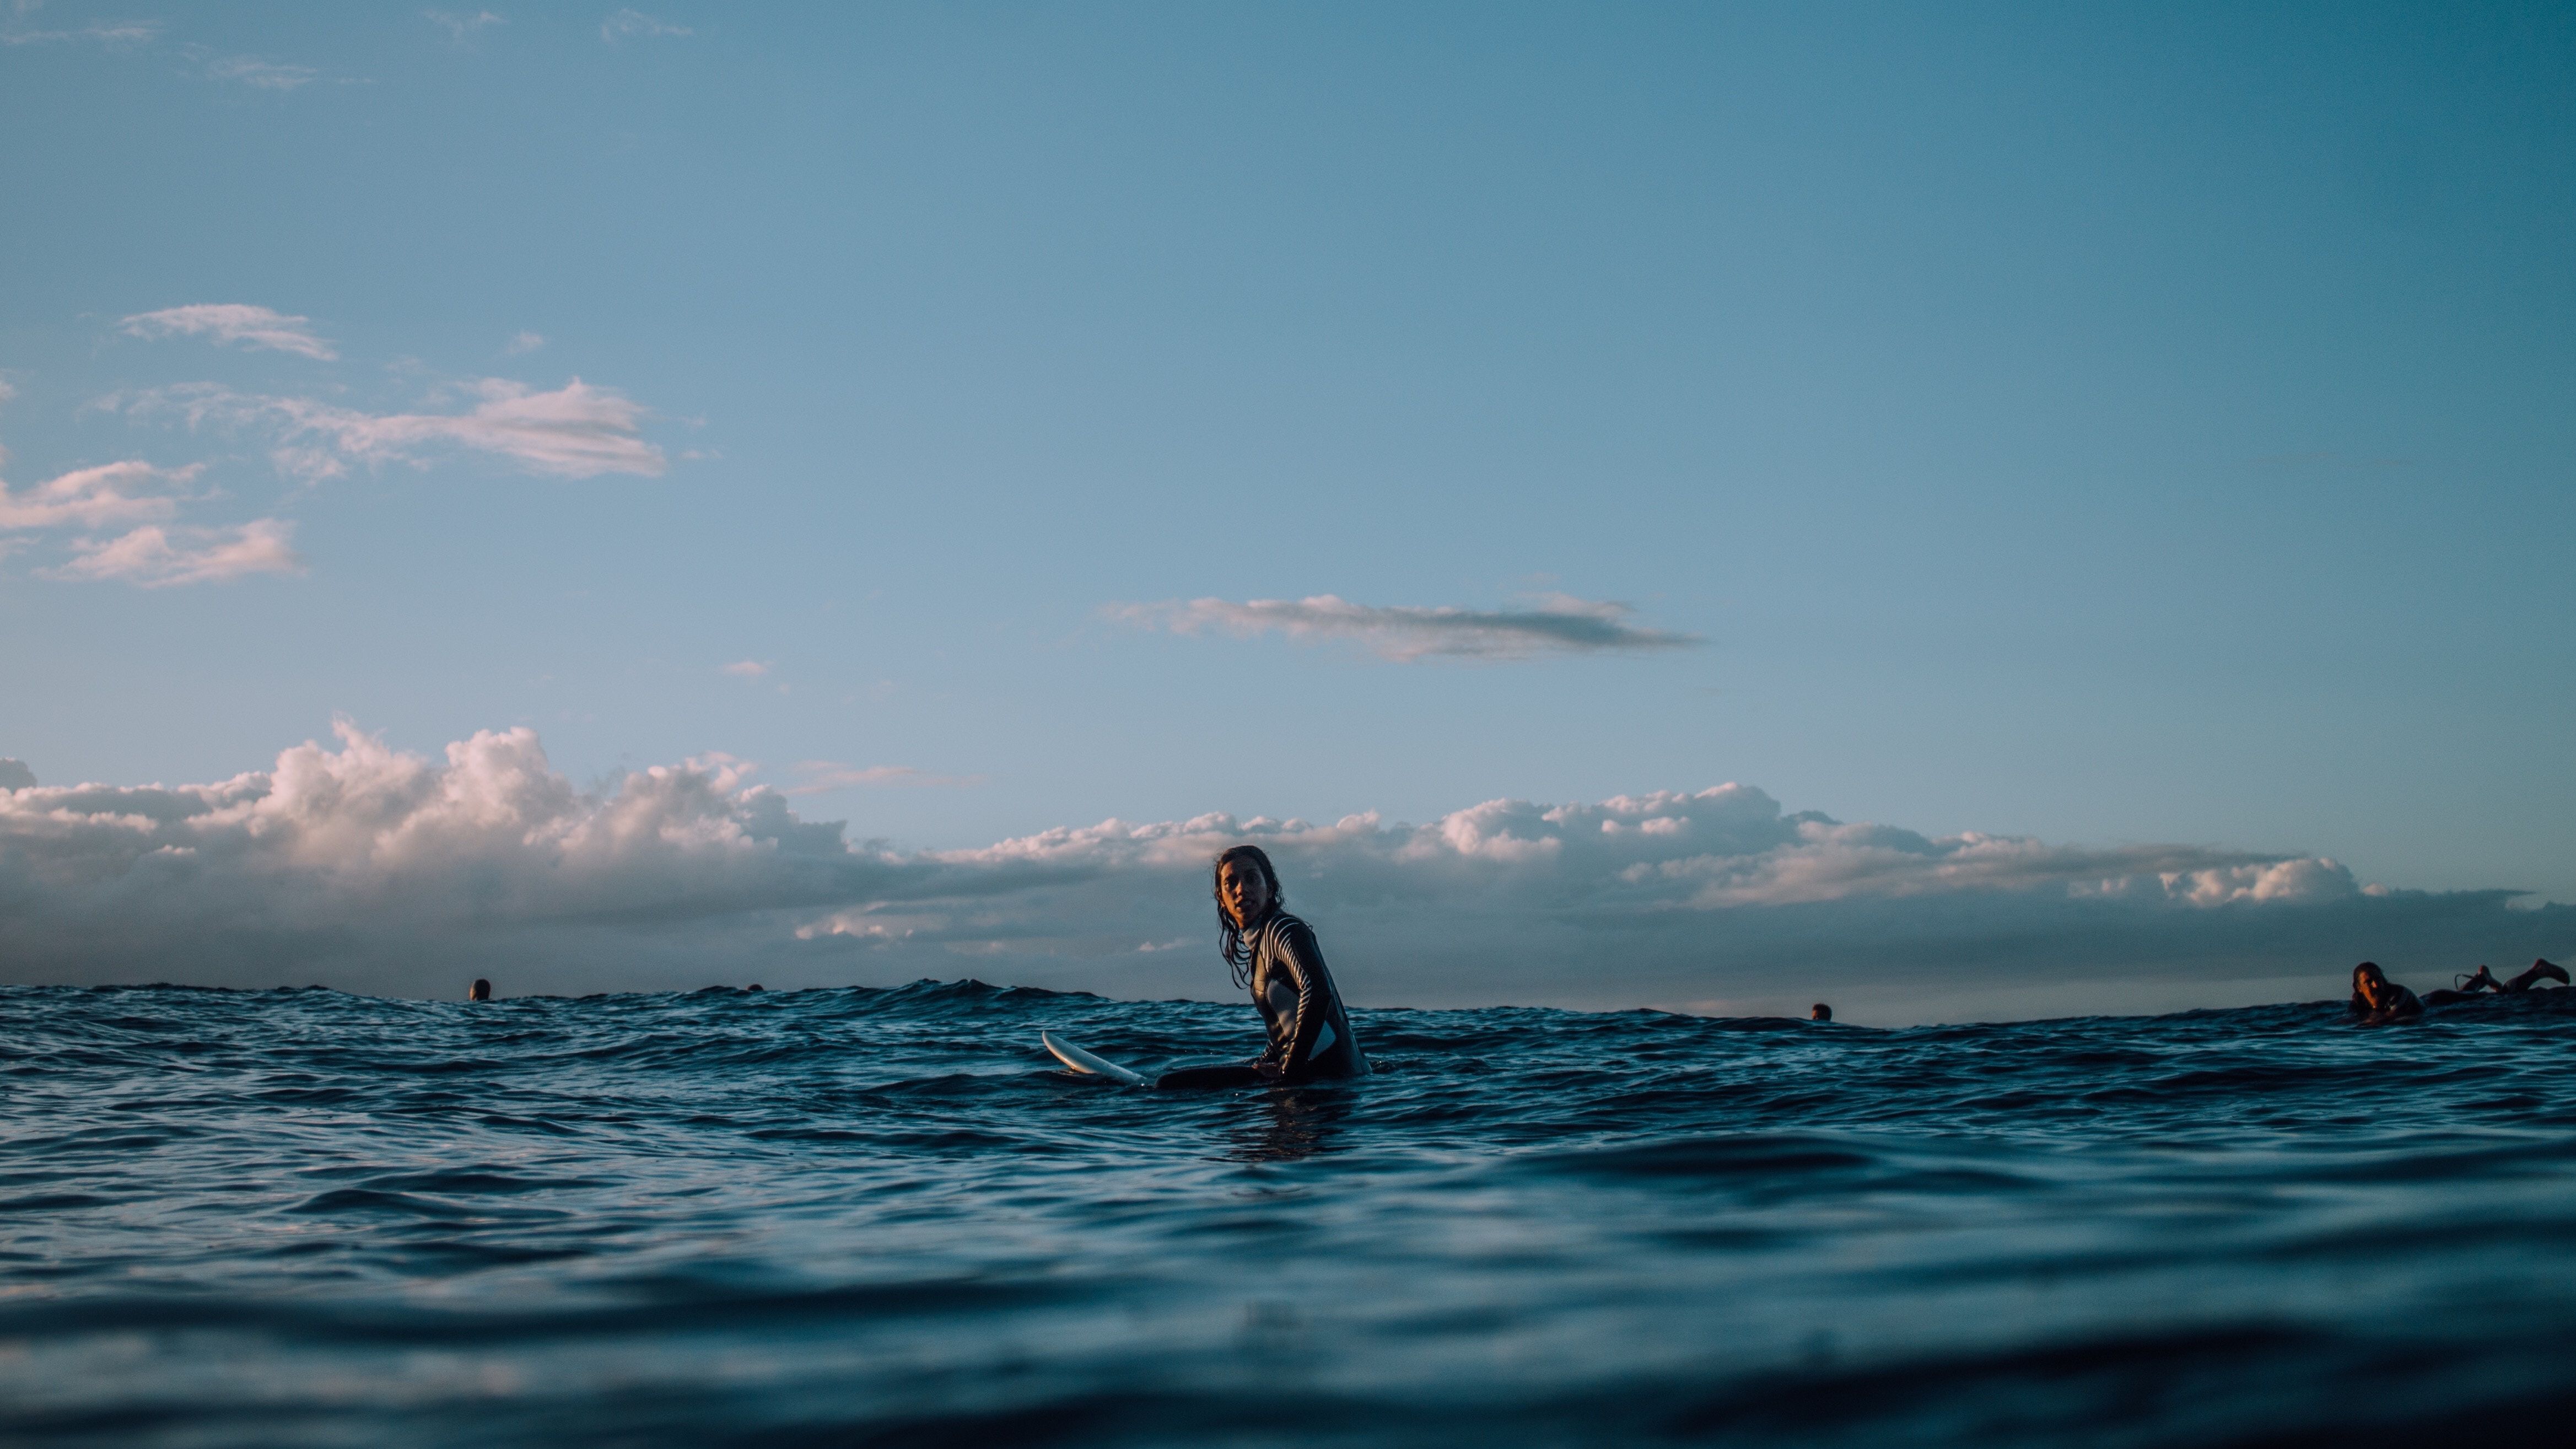 4674x2629 #sea, #woman, #surfing, #water, #wetsuit